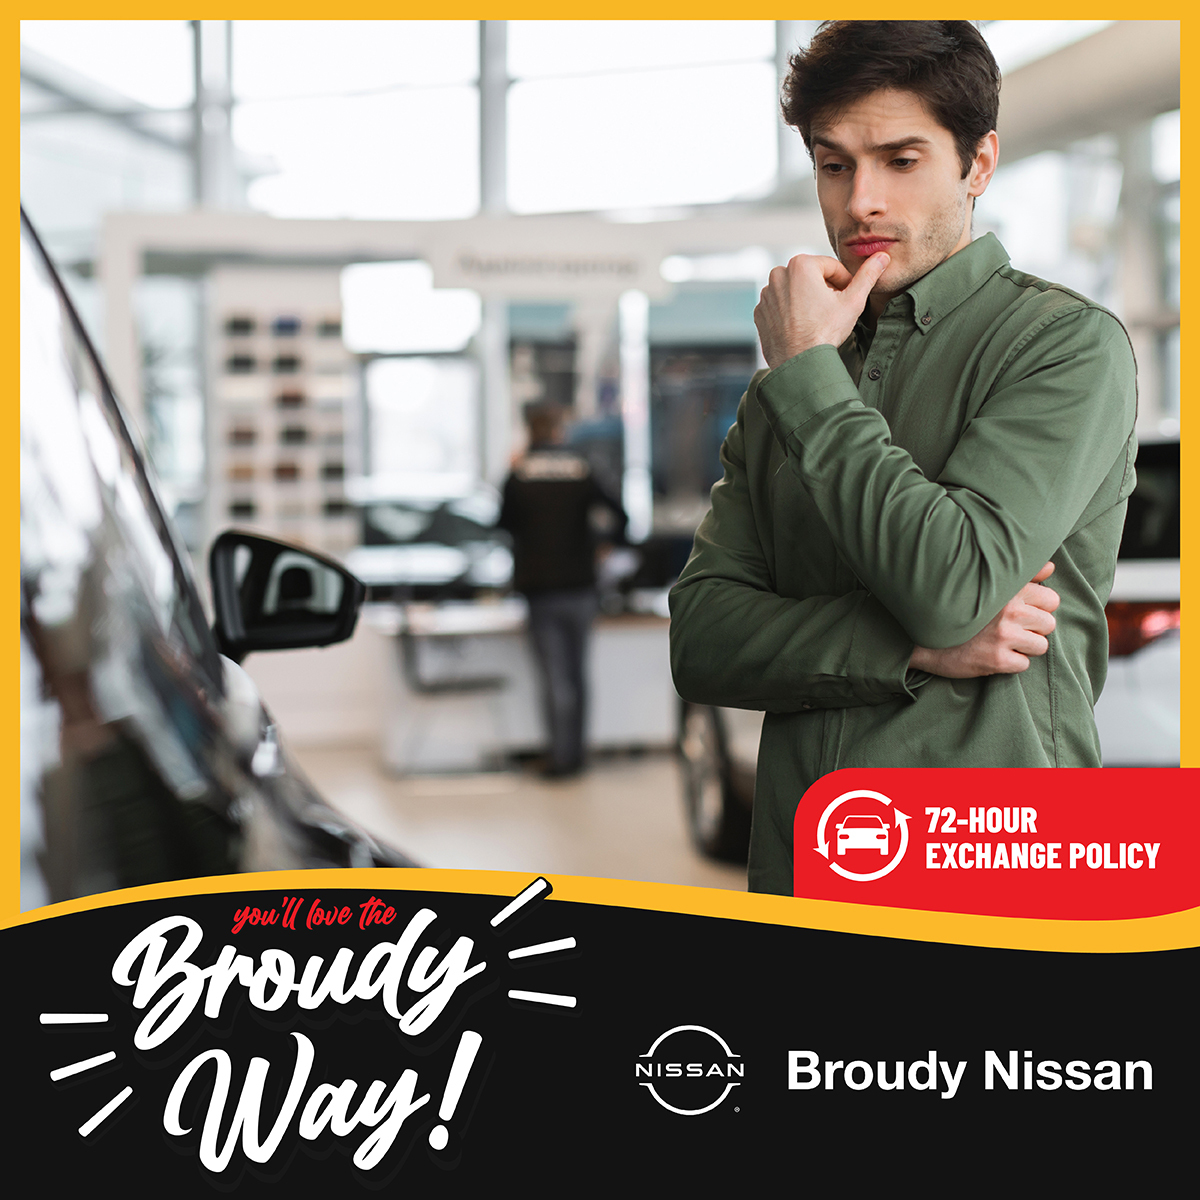 Discover peace of mind with Broudy Nissan's 72-hour exchange policy🌟

Visit Broudy Nissan today & ask about the Broudy Way✅ (link in bio)

#BroudyNissan #Ardmore #Nissan #NissanOklahoma #ArdmoreOklahoma #NissanUSA #NewVehicles #UsedVehicles #2024Nissans #BroudyWay